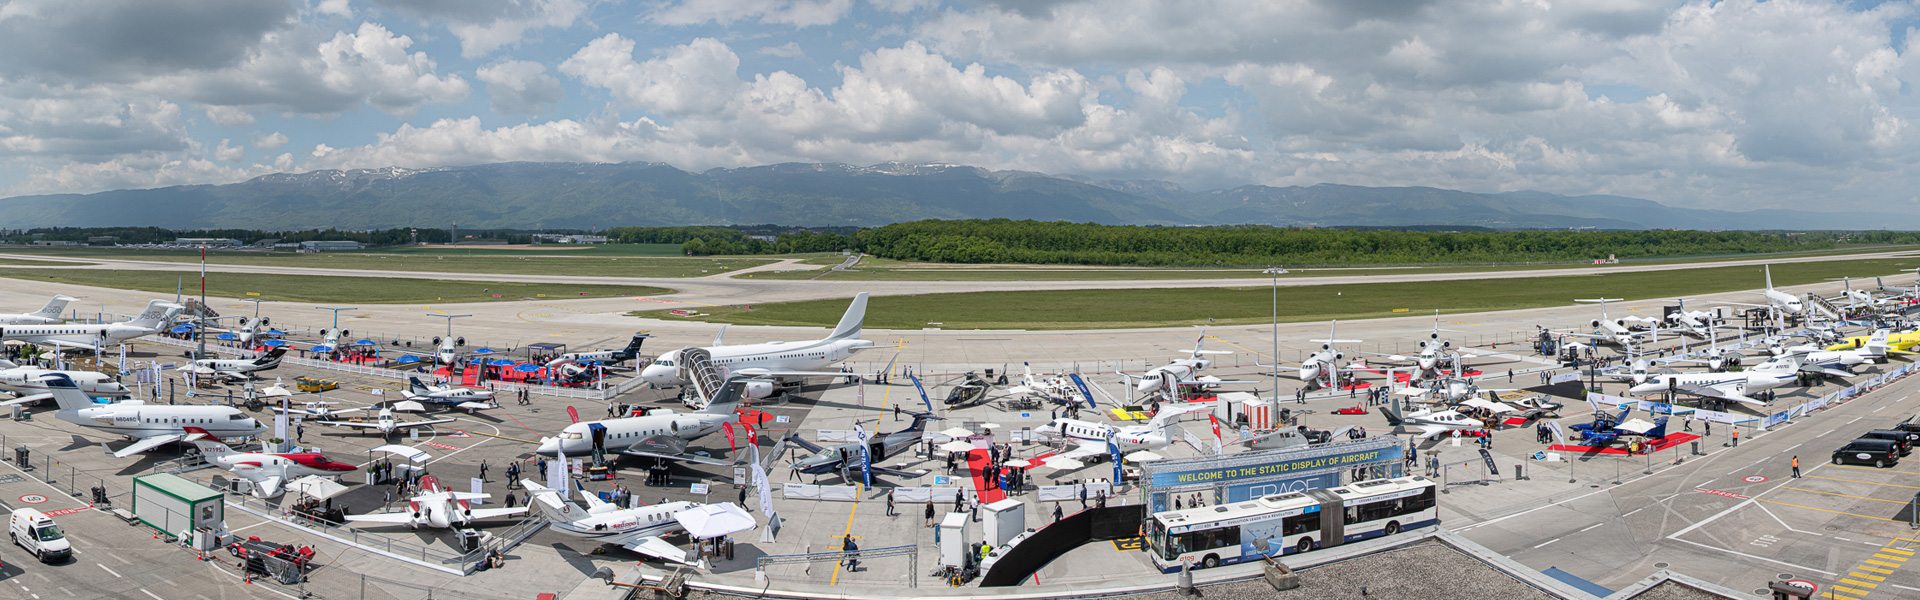 Explore a Wide Variety of the Latest Business Aircraft at EBACE2020